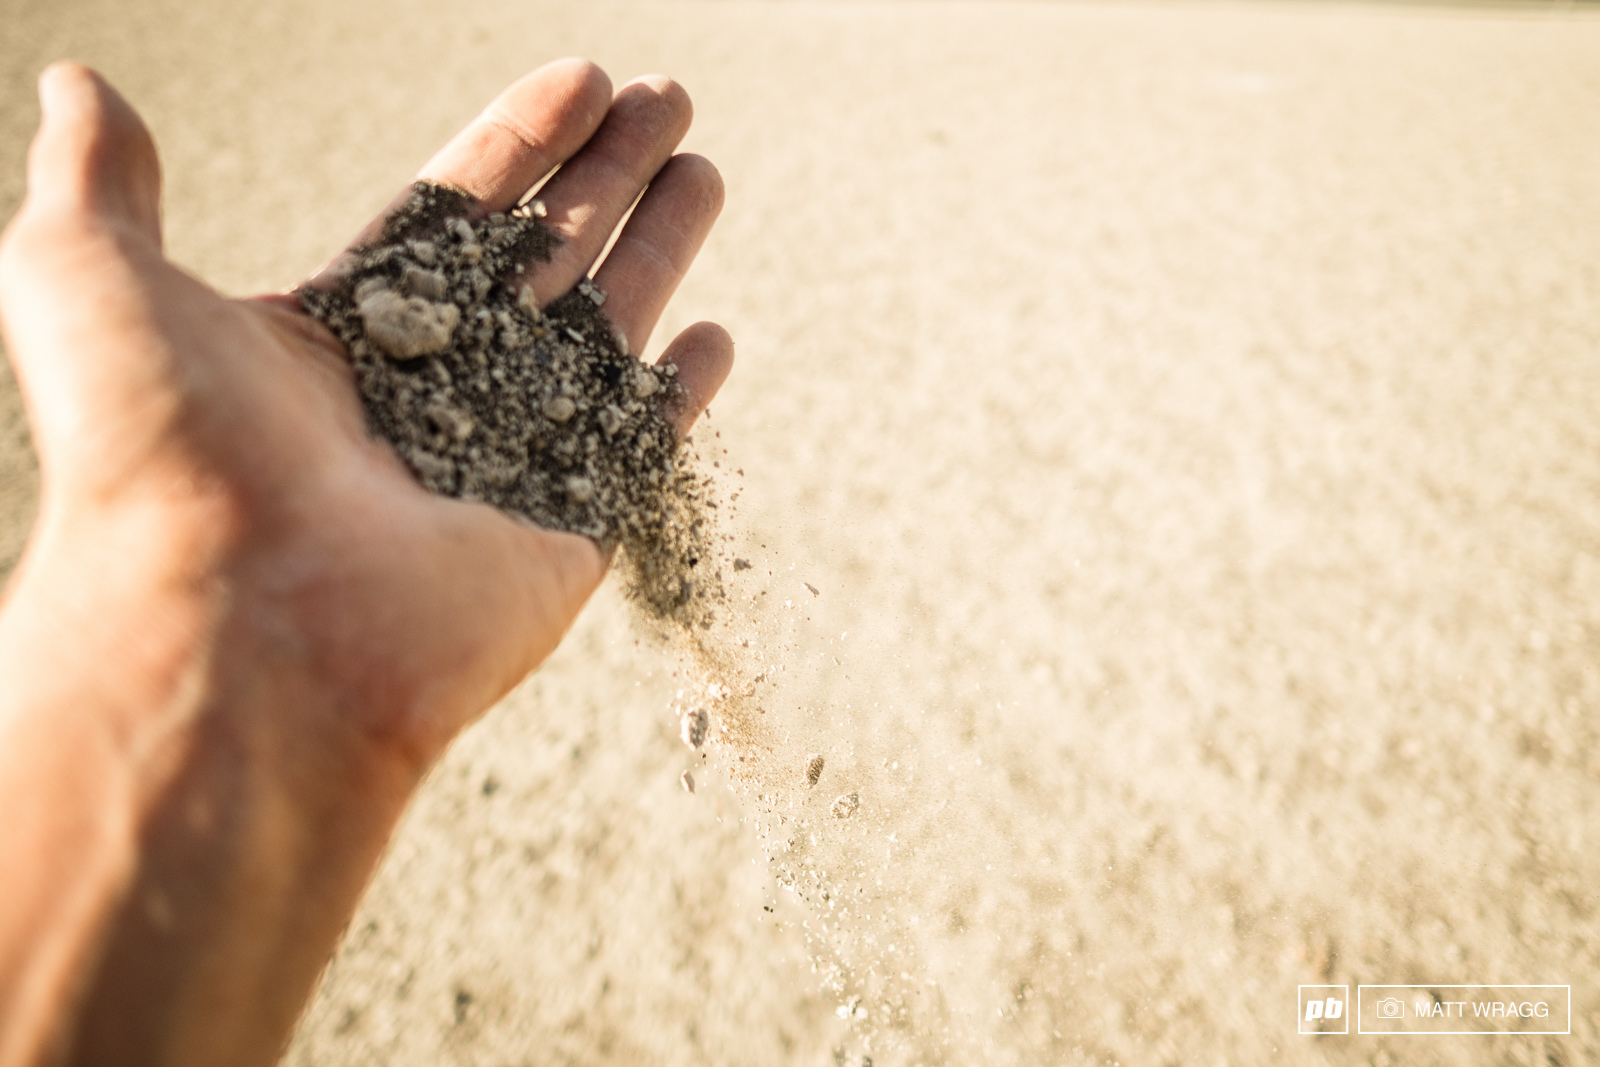 The volcanic sand is unreal hard-packed on the ground then it falls between your fingers like dust.